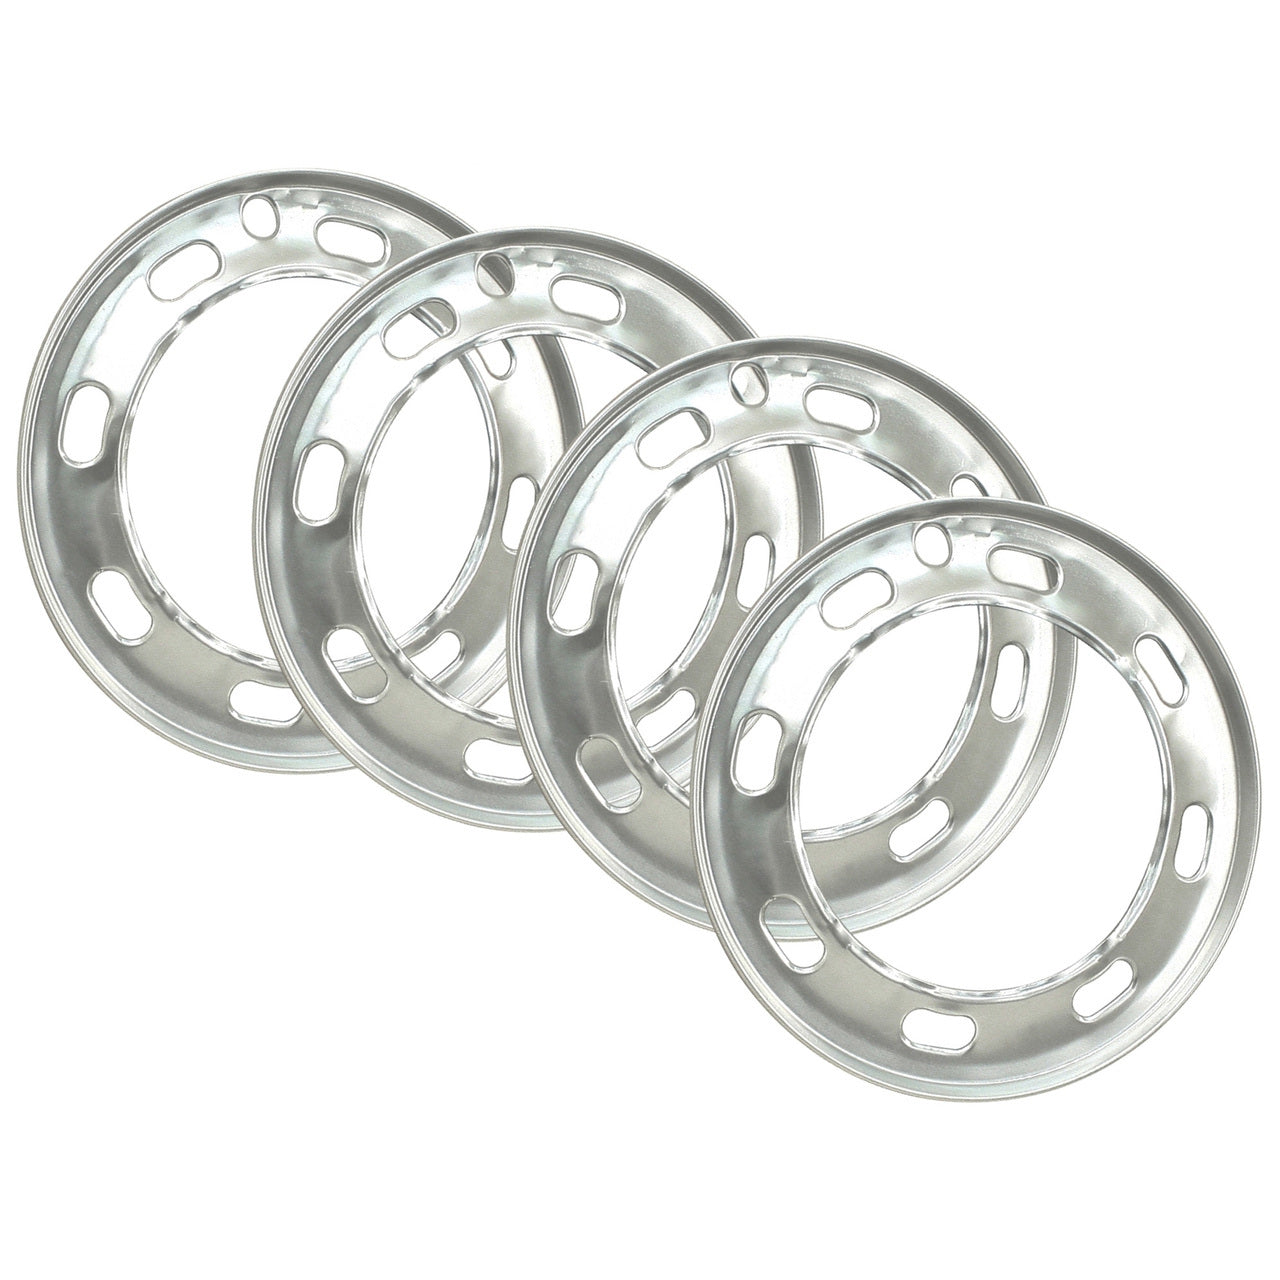 ALUMINUM BEAUTY RINGS FOR EARLY VW 15" WHEELS 1974-1979, SET OF 4